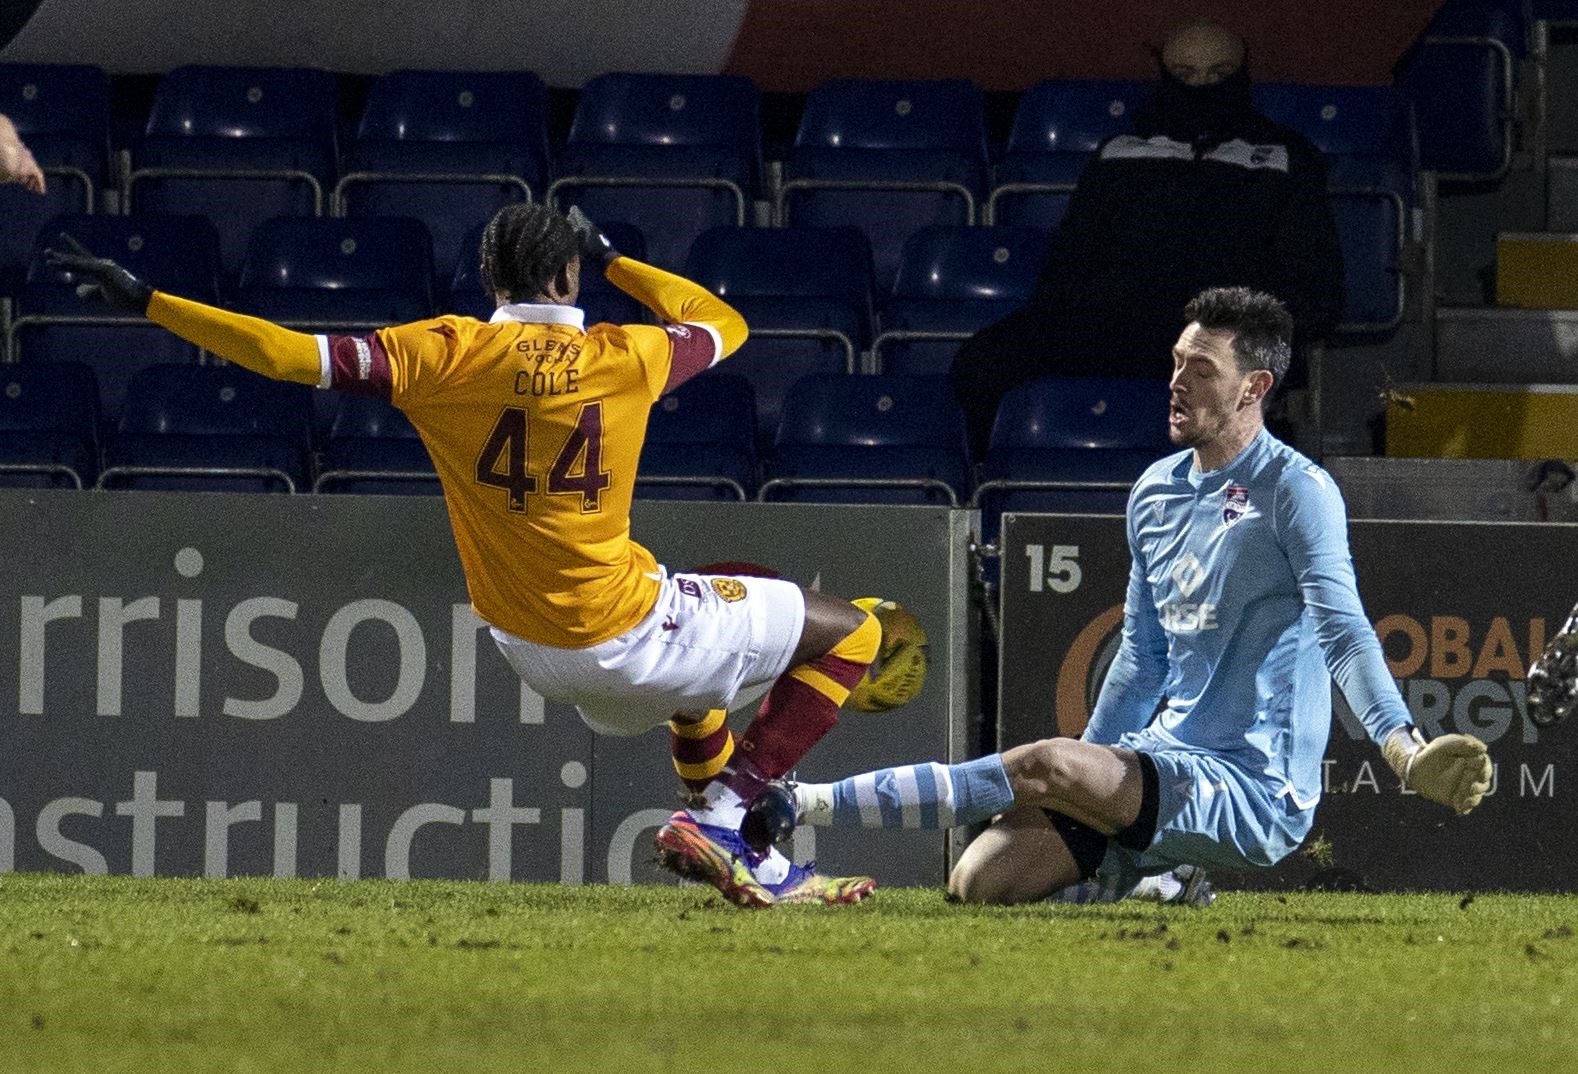 Picture - Ken Macpherson, Inverness. Ross County(1) v Motherwell(2). 27.01.21. Ross County 'keeper Ross Laidlaw blocks this shot from Motherwell's Devante Cole.